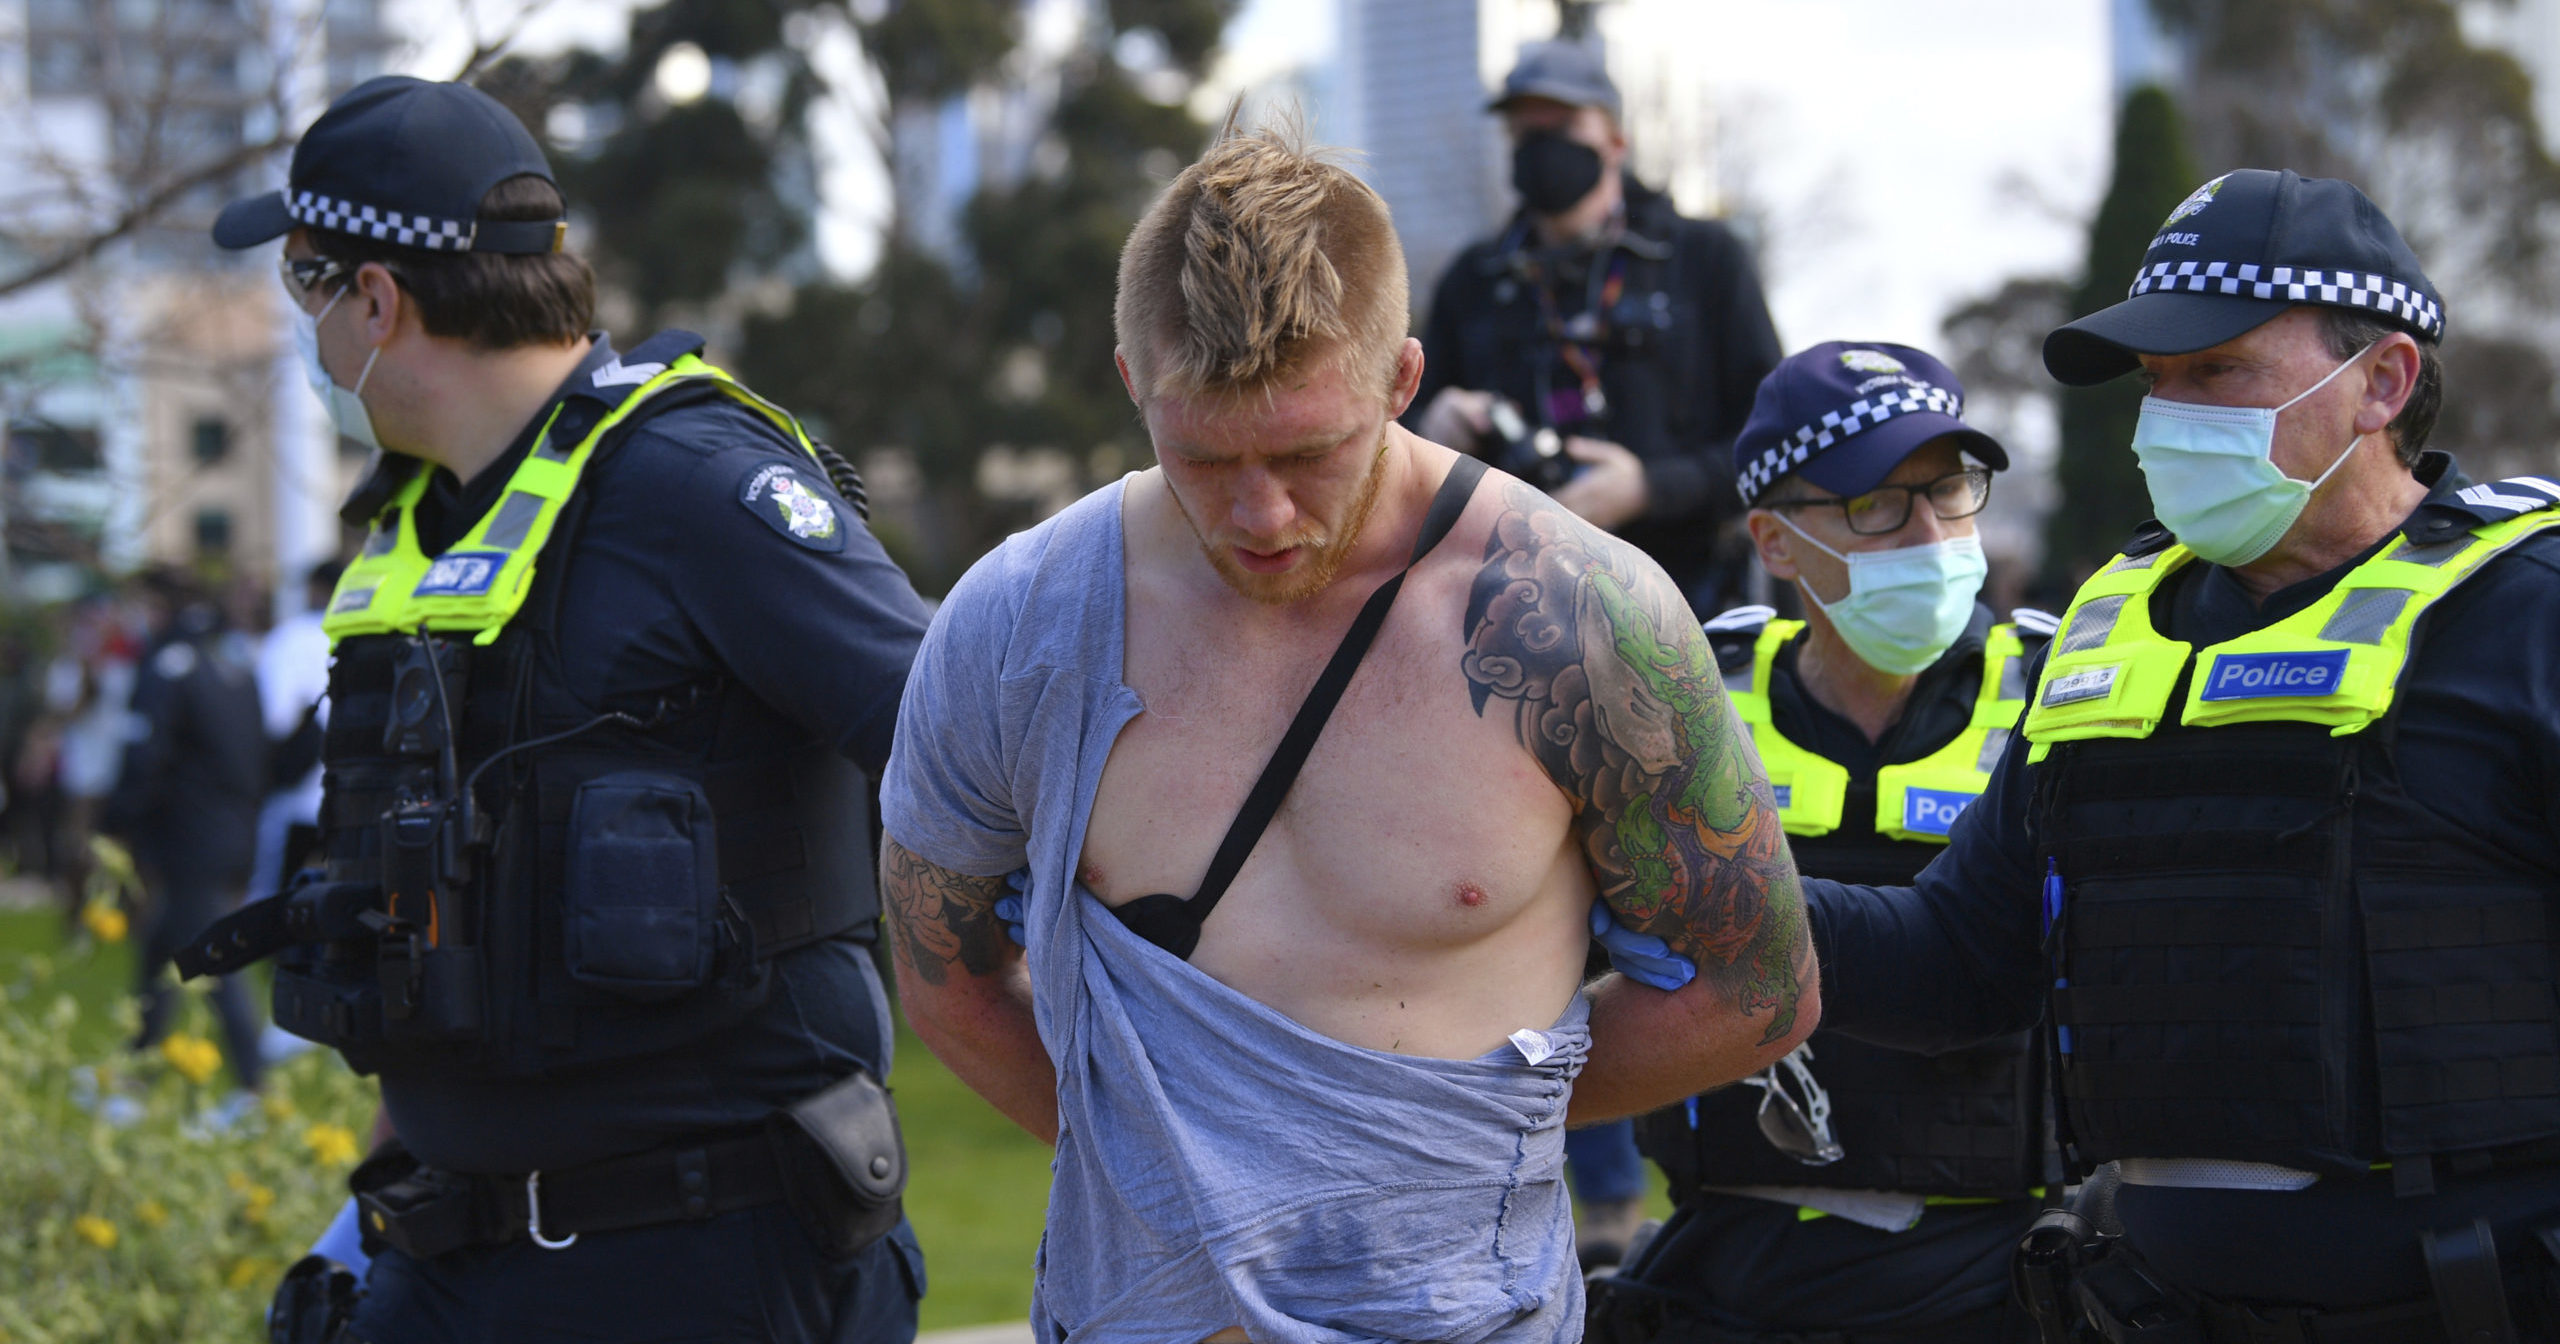 Police arrest a man as people gather at a protest against lockdown measures in Melbourne, Australia, on Sep. 5, 2020.